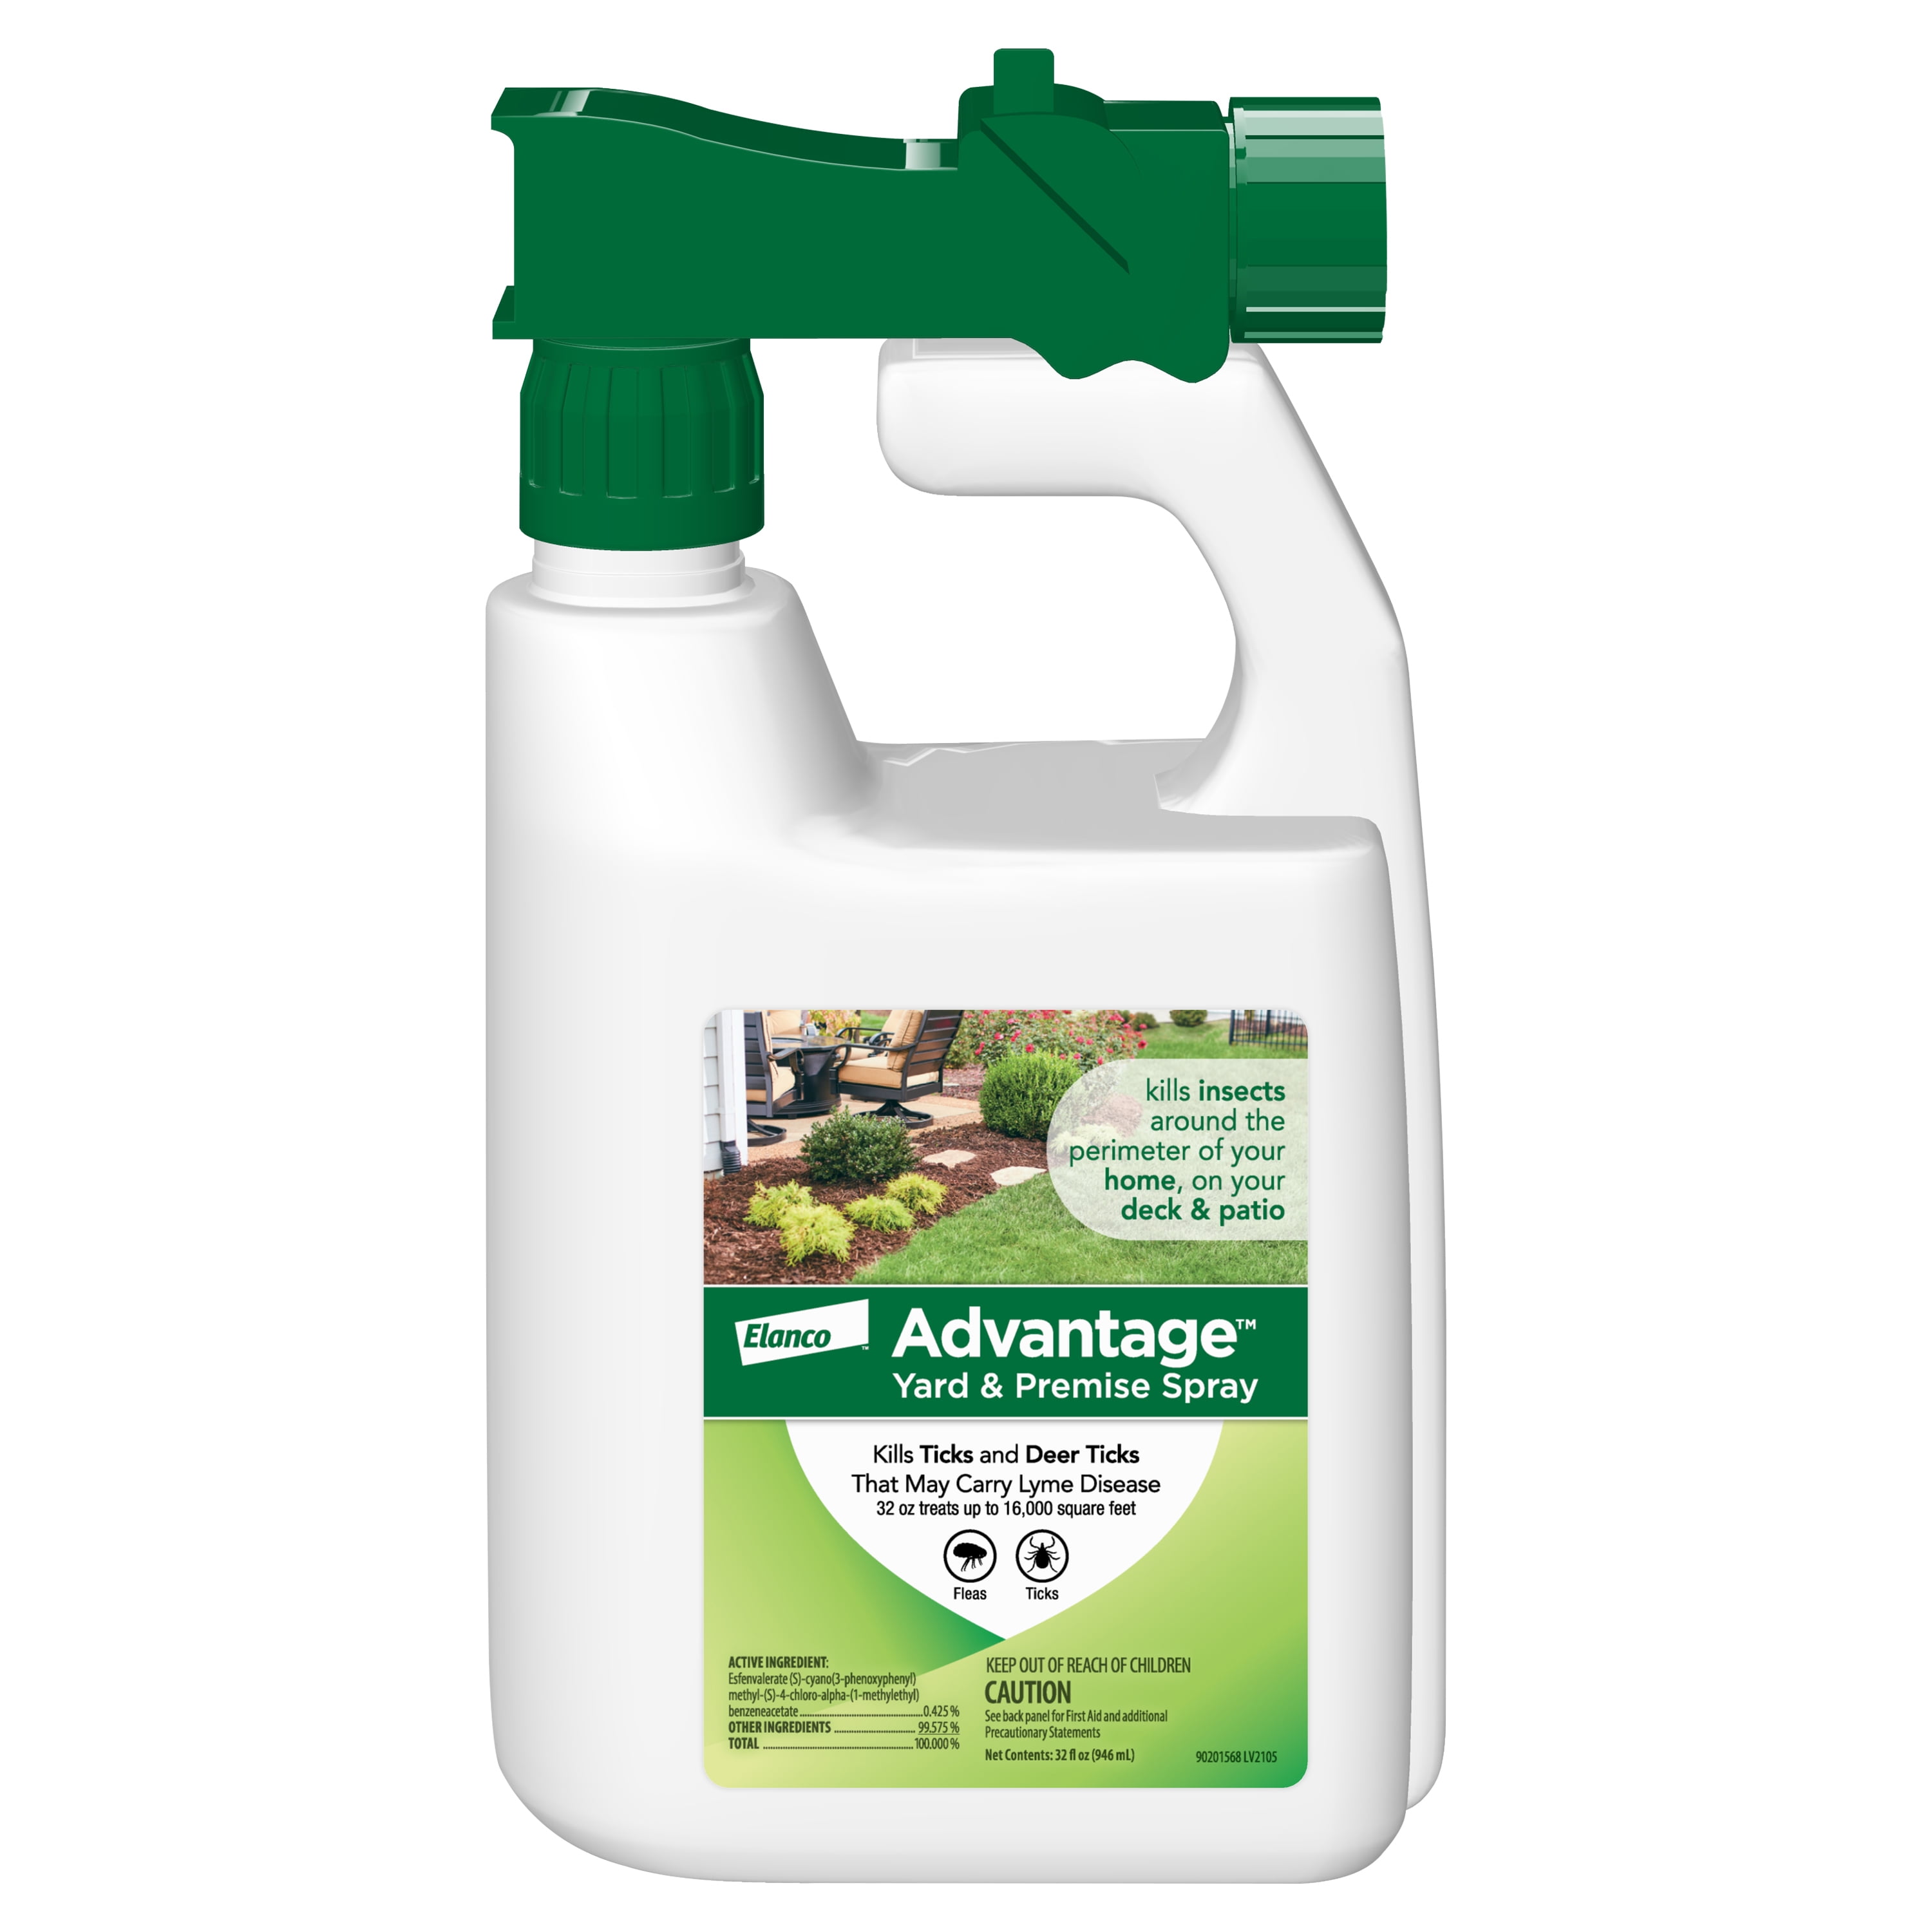 Advantage Yard & Premise Spray for Insects, Fleas and Ticks, 32 oz